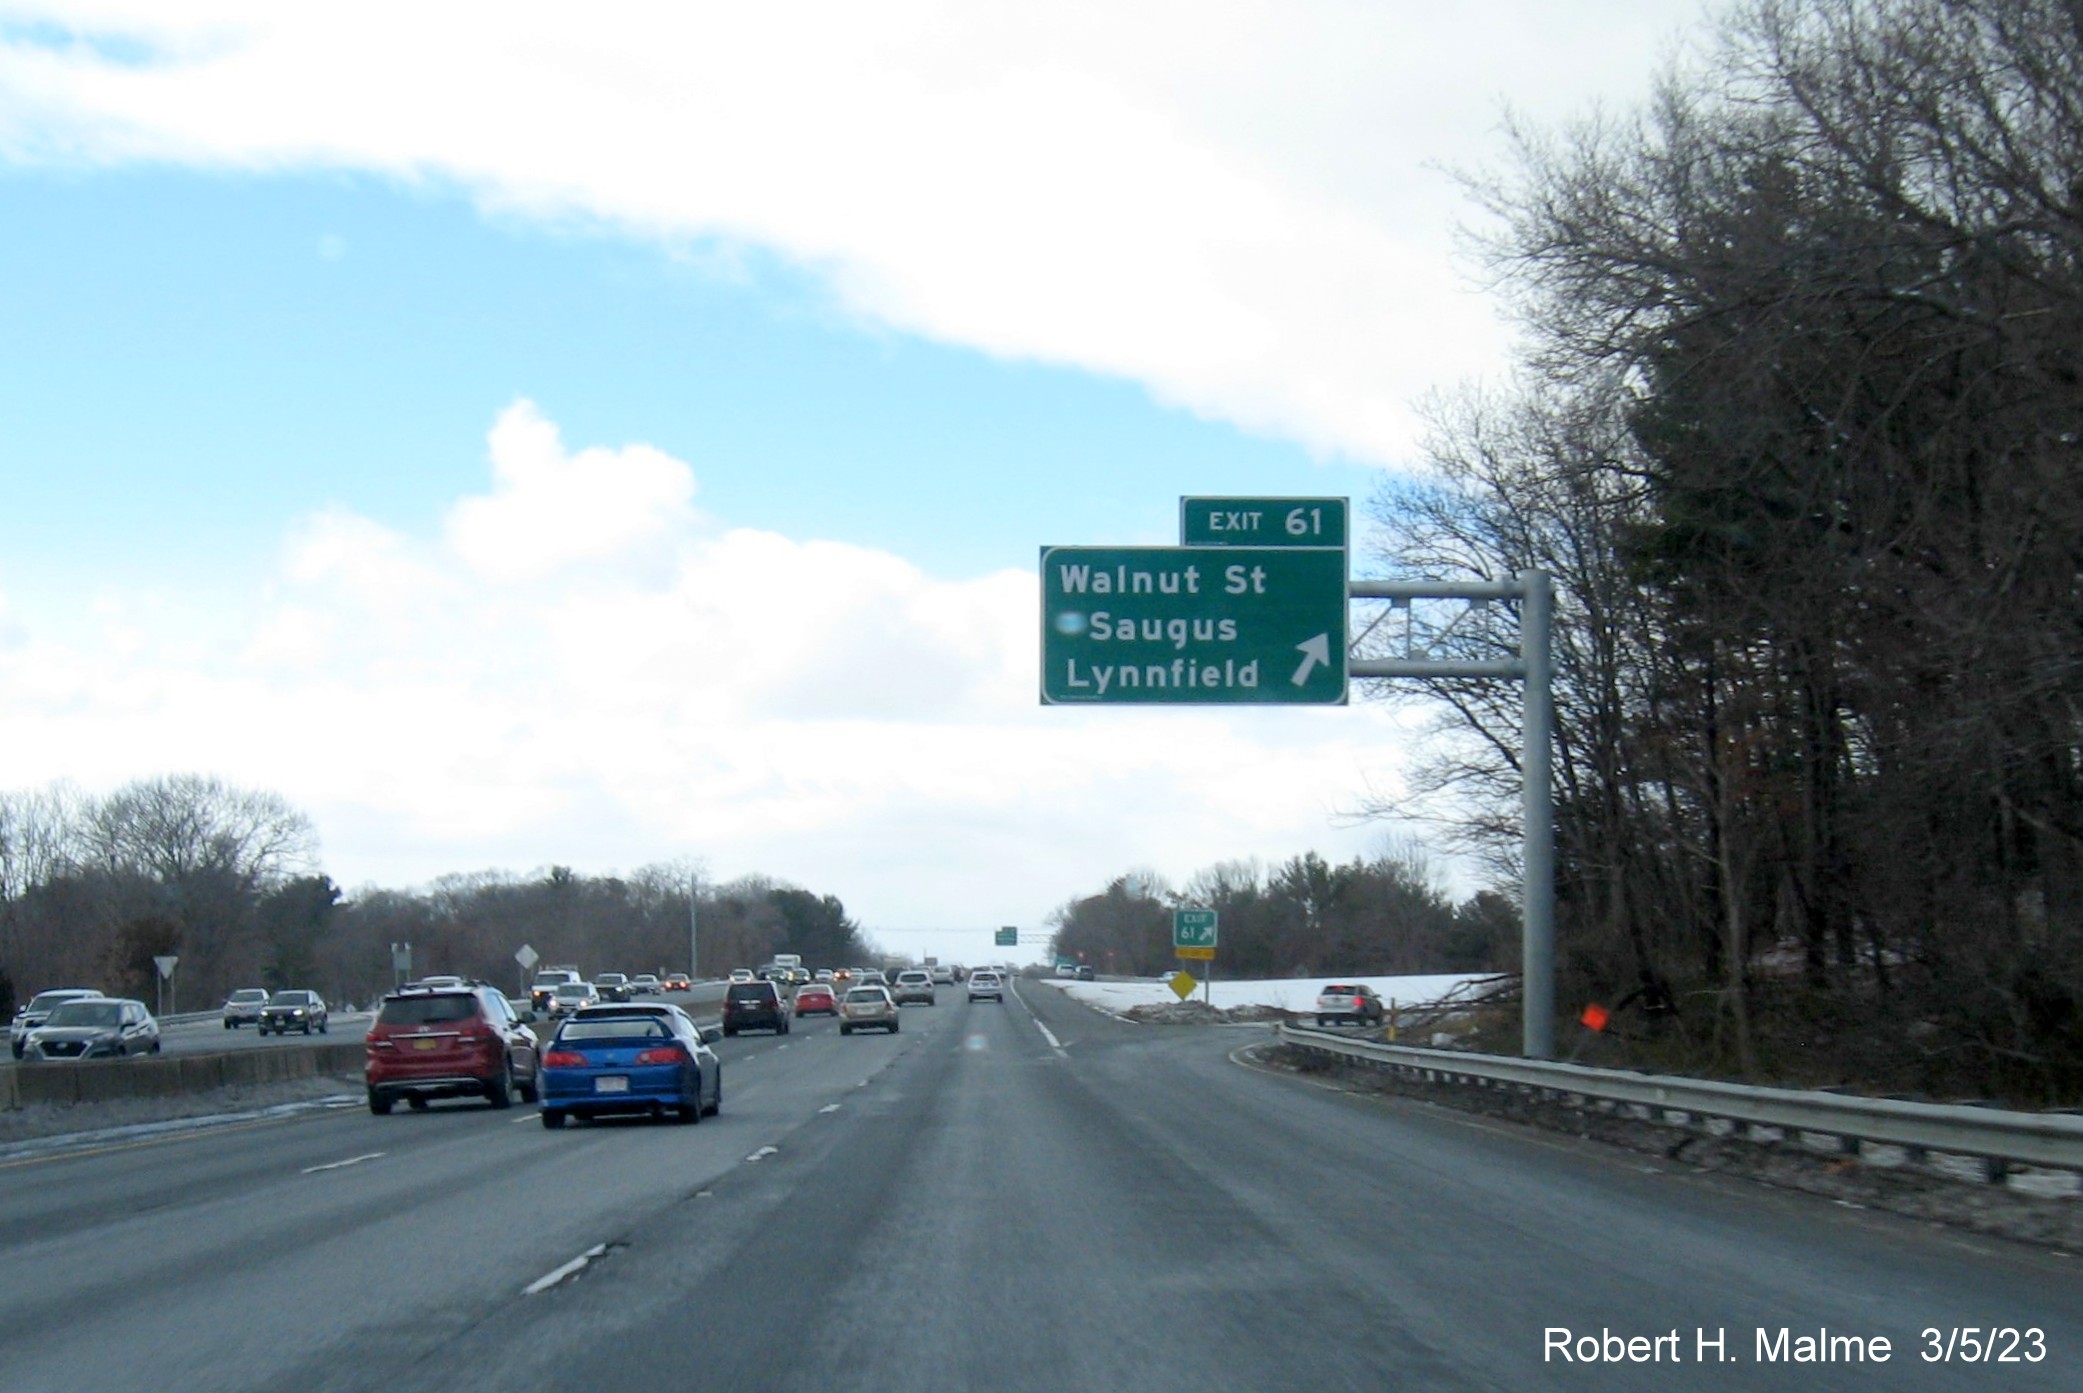 Image of recently placed overhead ramp sign for Walnut Street exit on I-95/MA 128 South in Lynnfield, March 2023